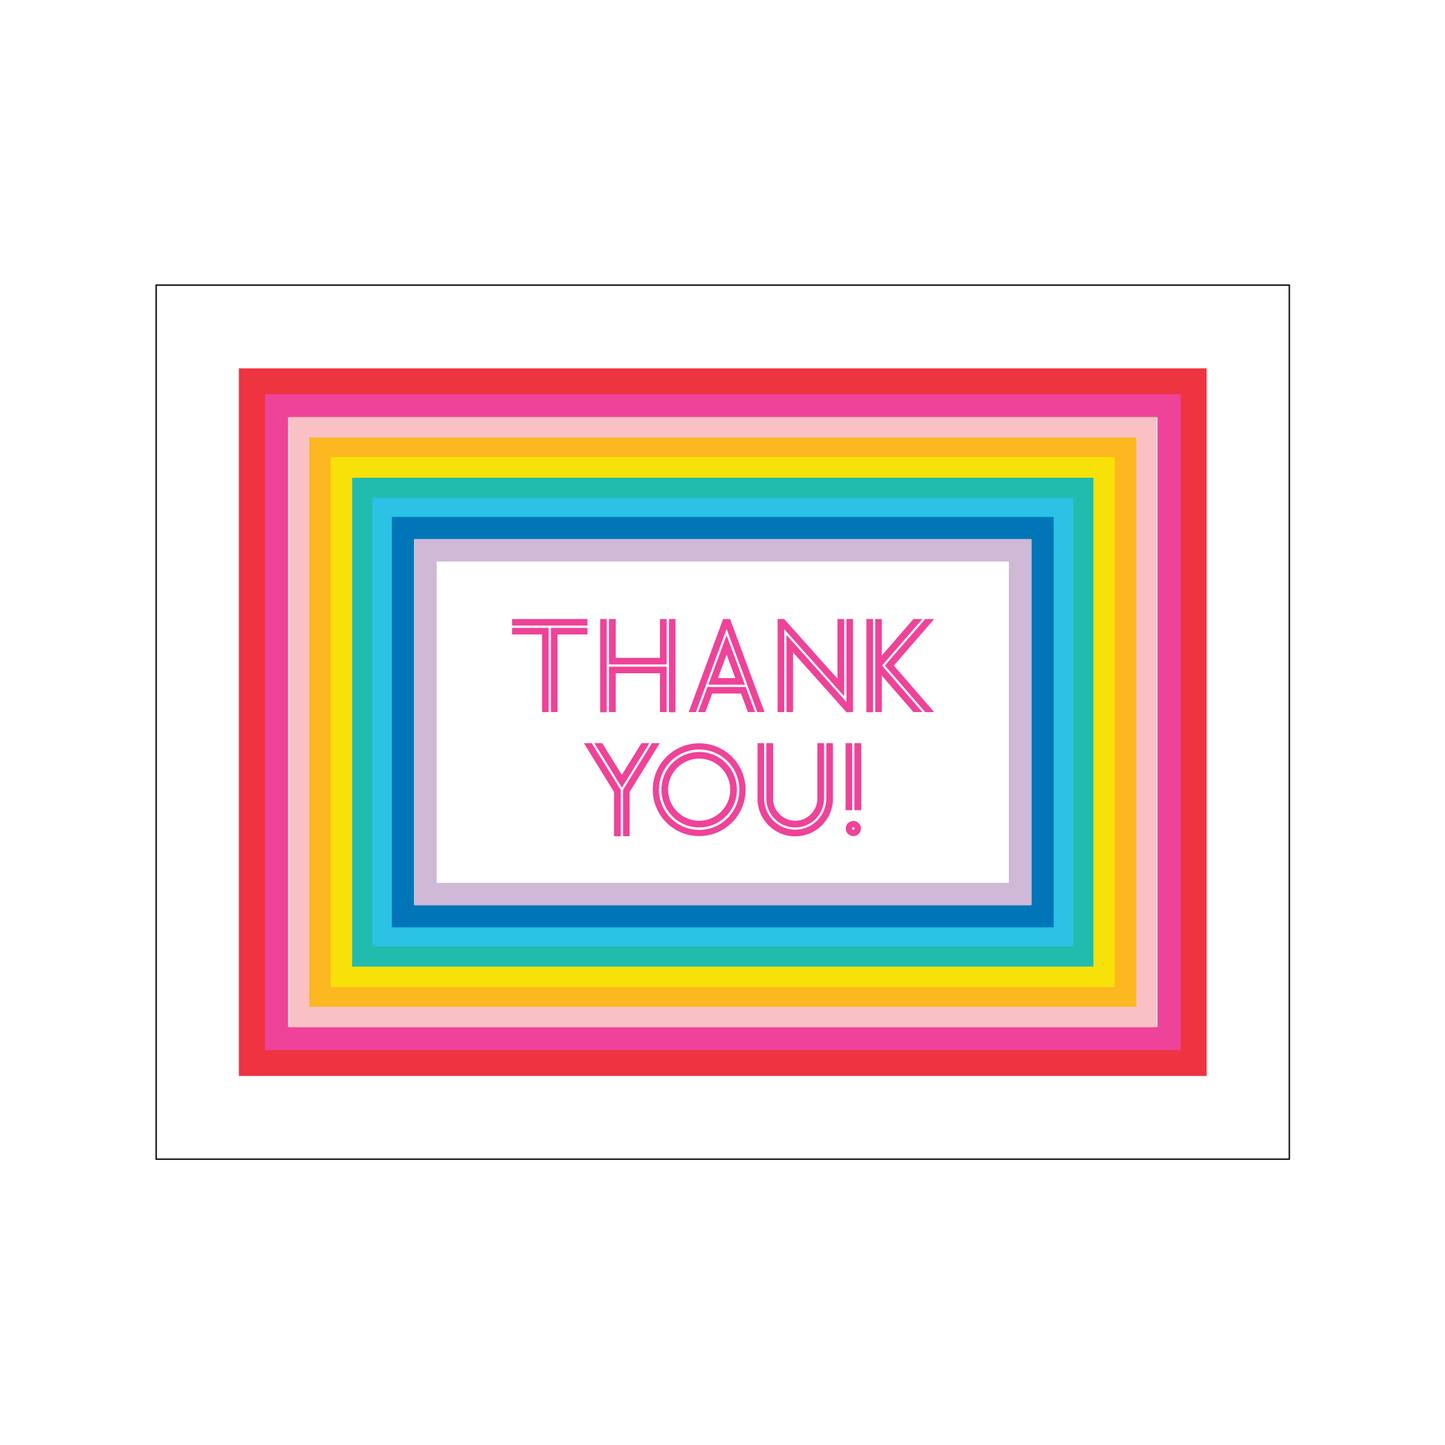 "Thank you!" 2-sided notecard